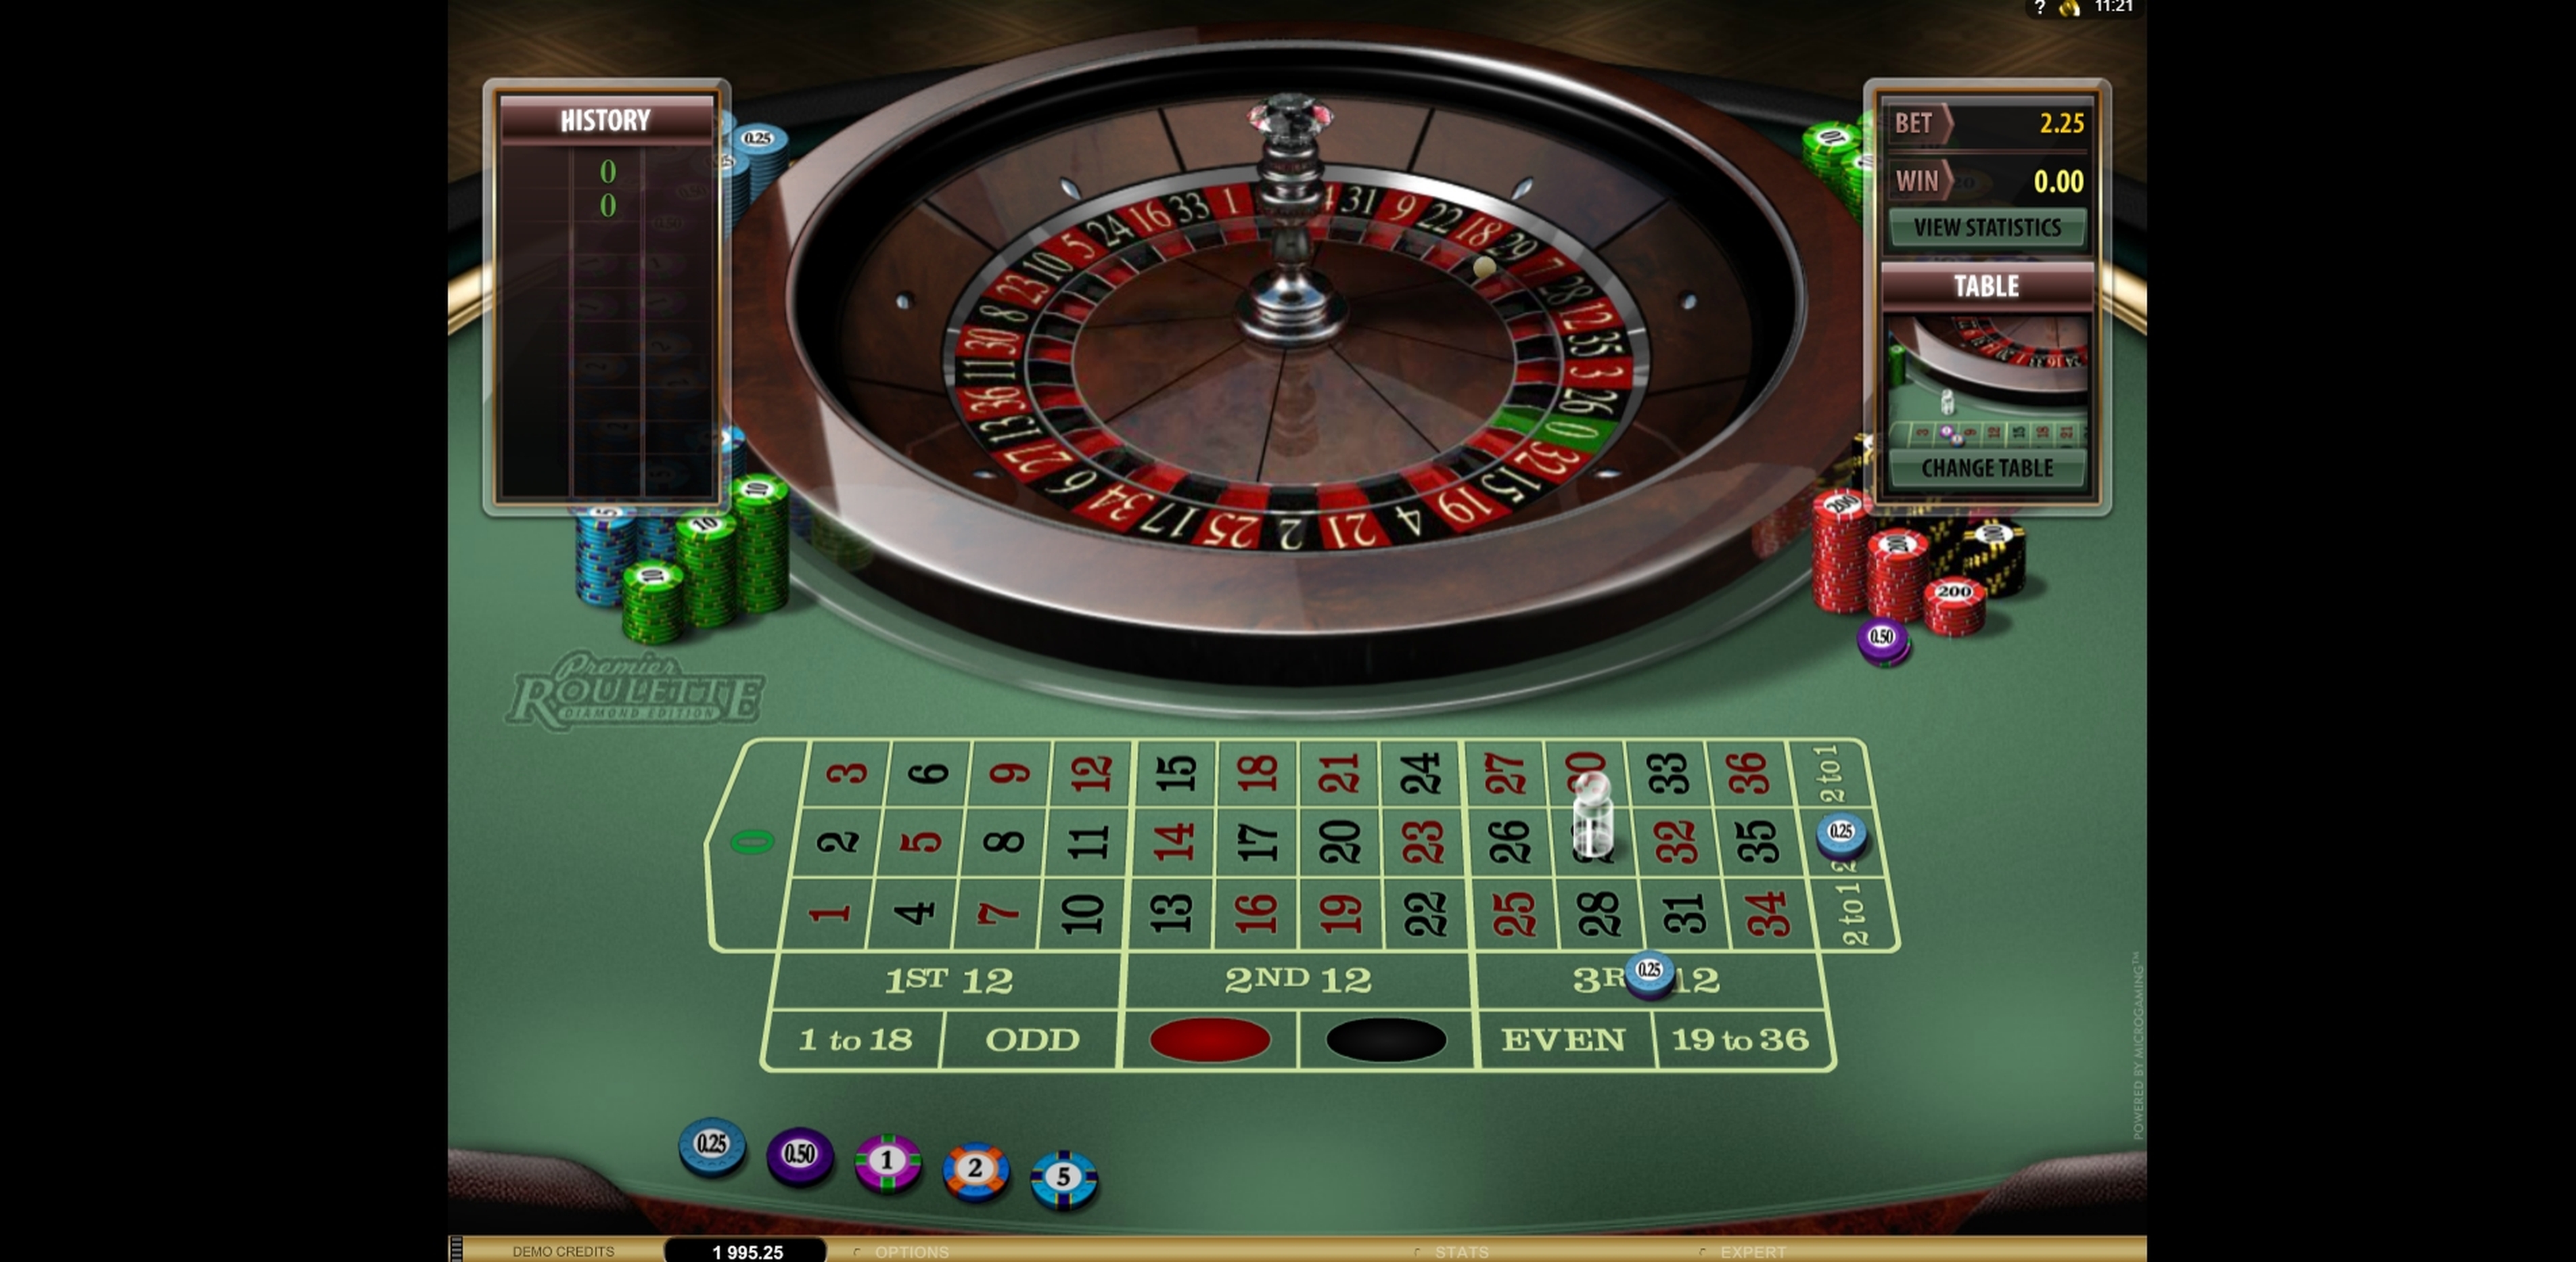 Win Money in Premier Roulette Diamond Edition Free Slot Game by Microgaming